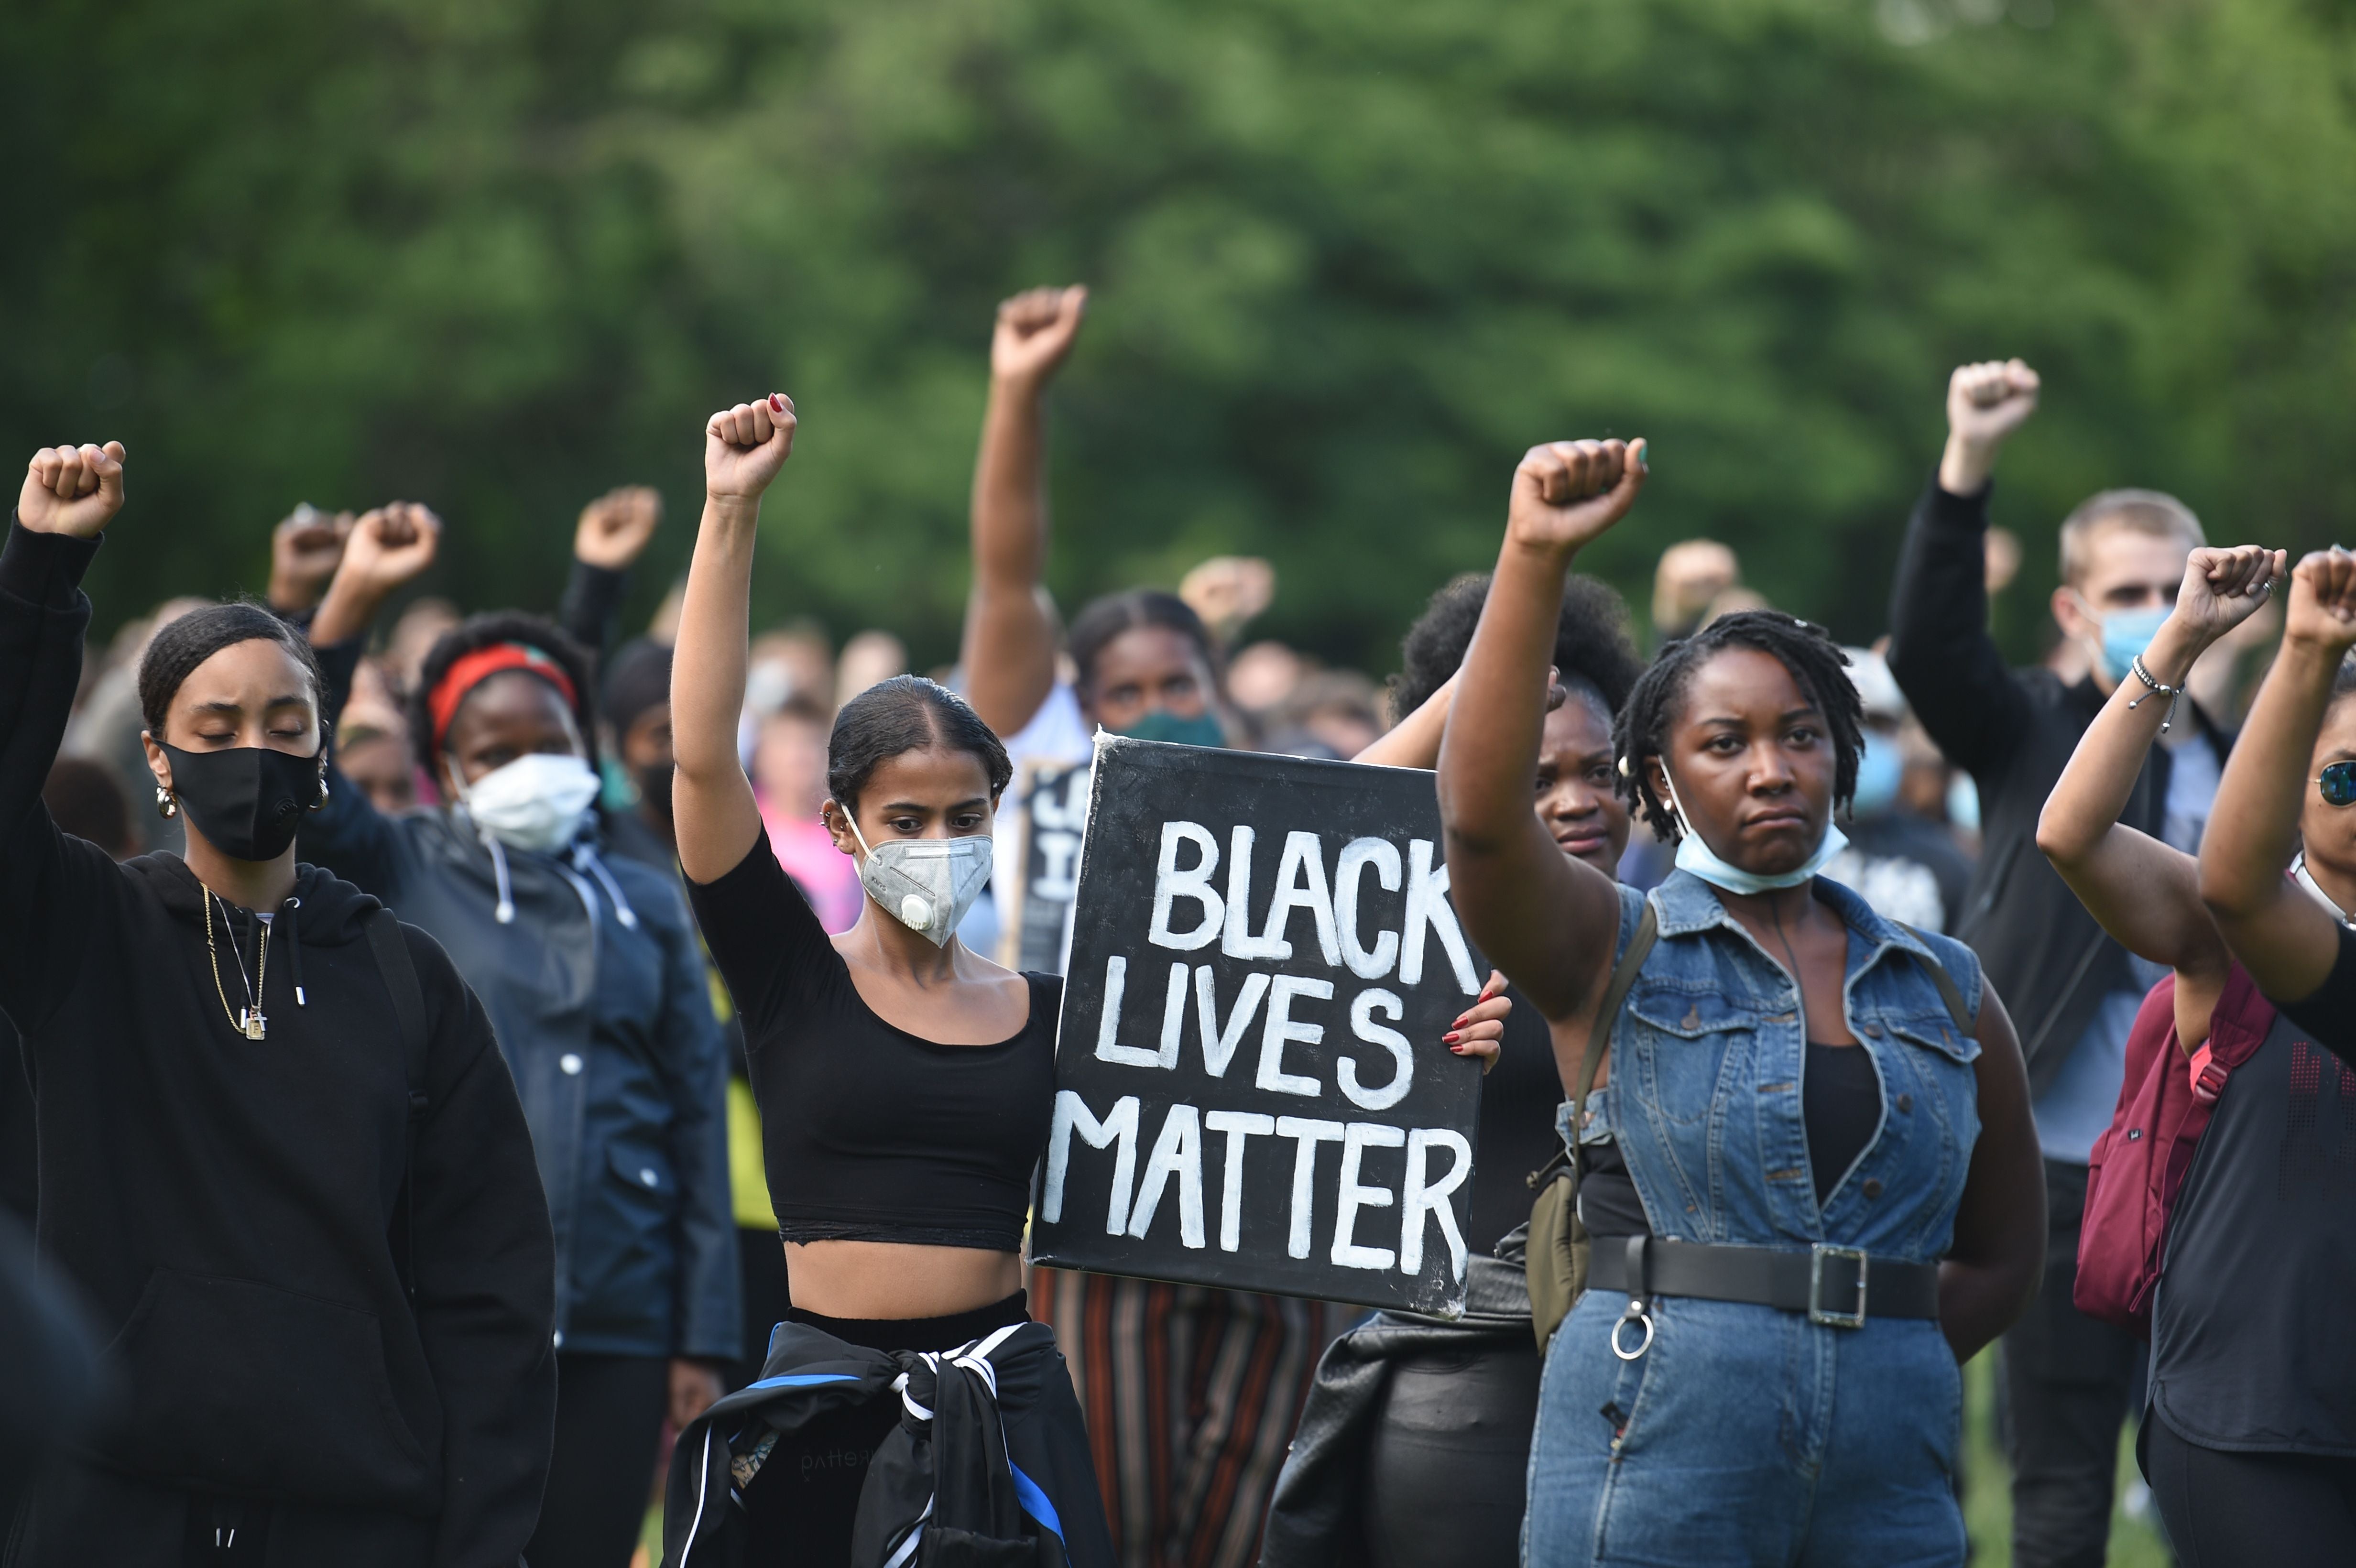 TOPSHOT - Protesters hold up fists at a gathering in support of the Black Lives Matter movement on Woodhouse Moor in Leeds in northern England on June 21, 2020, in the aftermath of the death of unarmed black man George Floyd in police custody in the US.